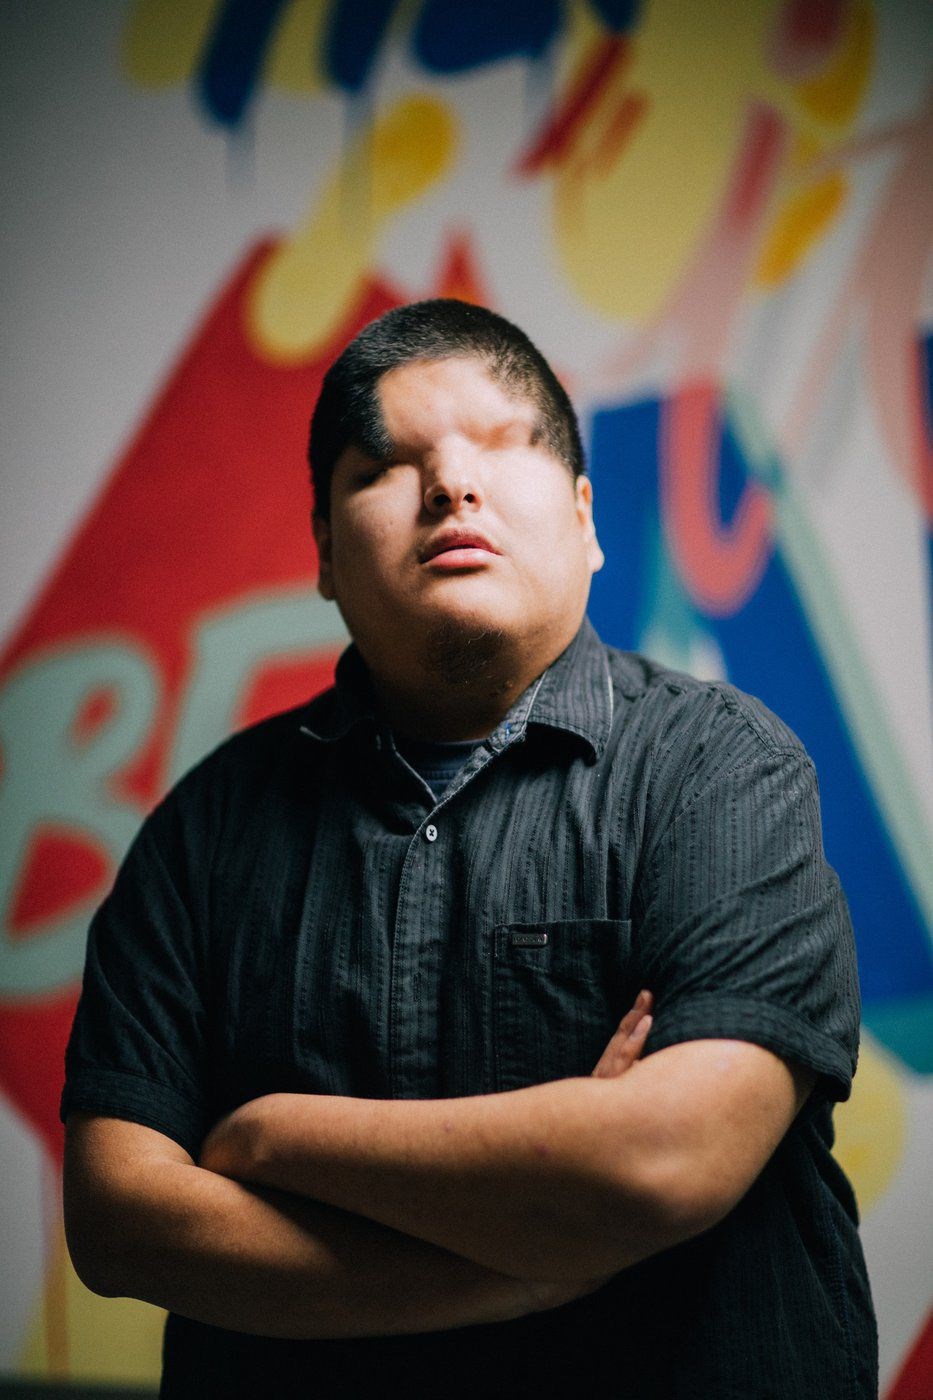 Indigenous music producer and recording artist Matthew Monias, also known as Mattmac.